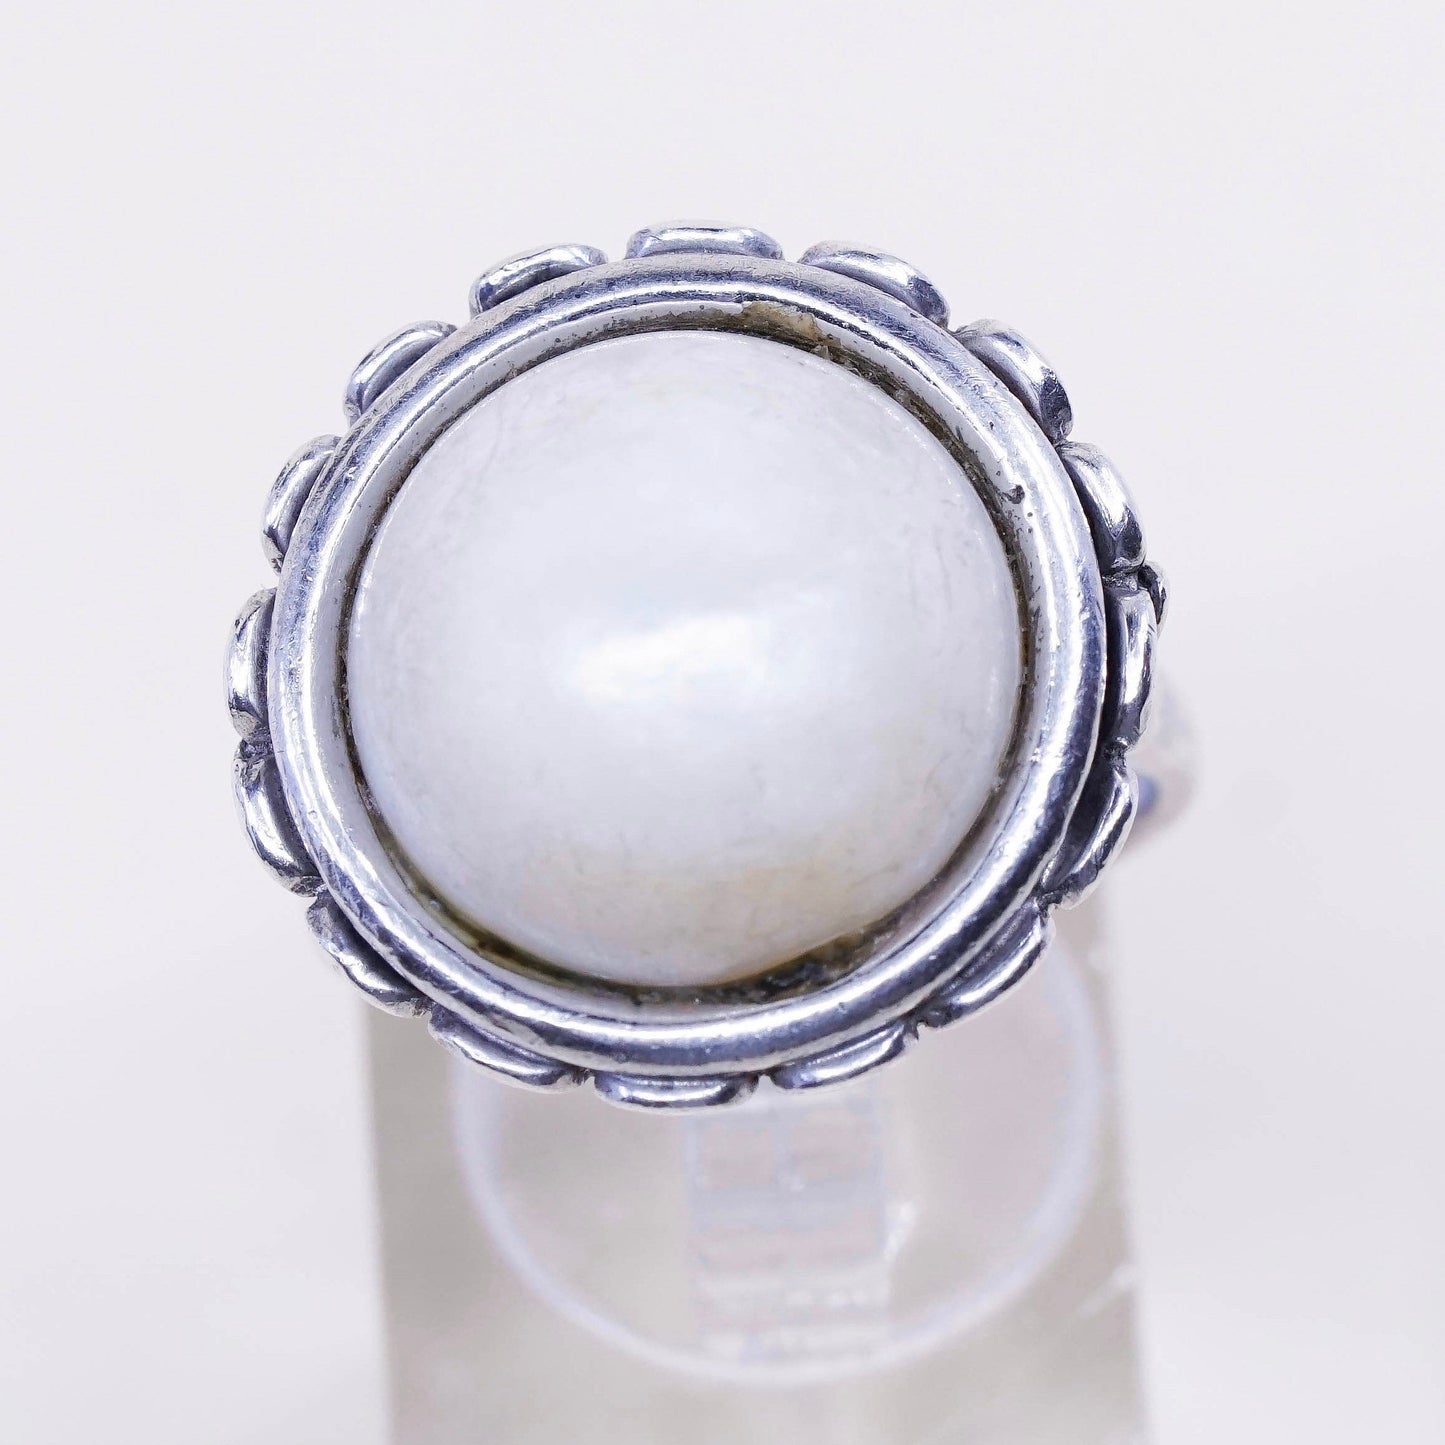 Size 8, vtg sterling silver handmade crown cocktail ring w/ mother of pearl